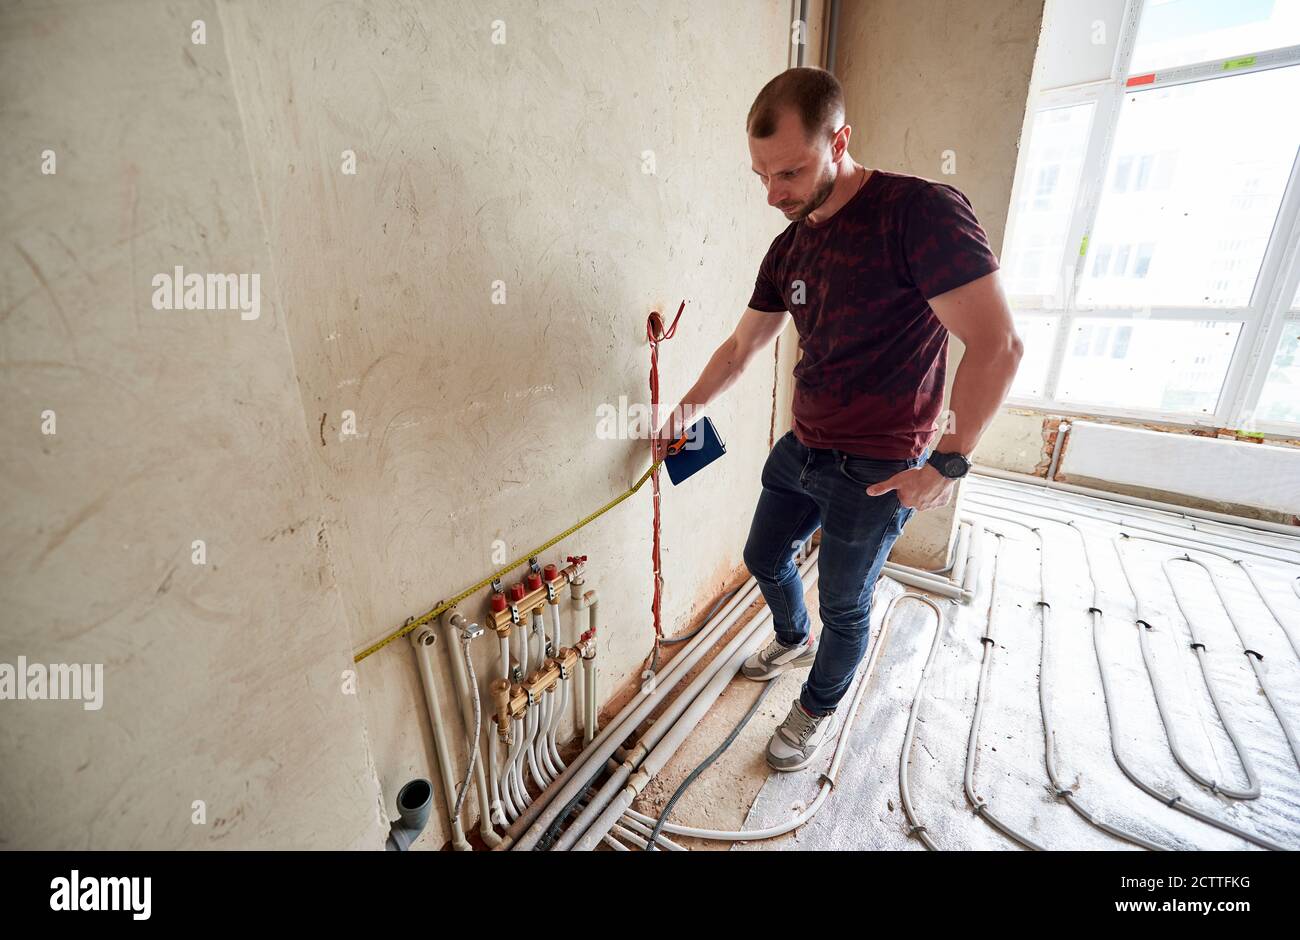 Serious man measuring wall with tape measure in room with underfloor heating pipes. Handyman holding notebook and taking measurements while working on renovation of apartment. Repair concept Stock Photo